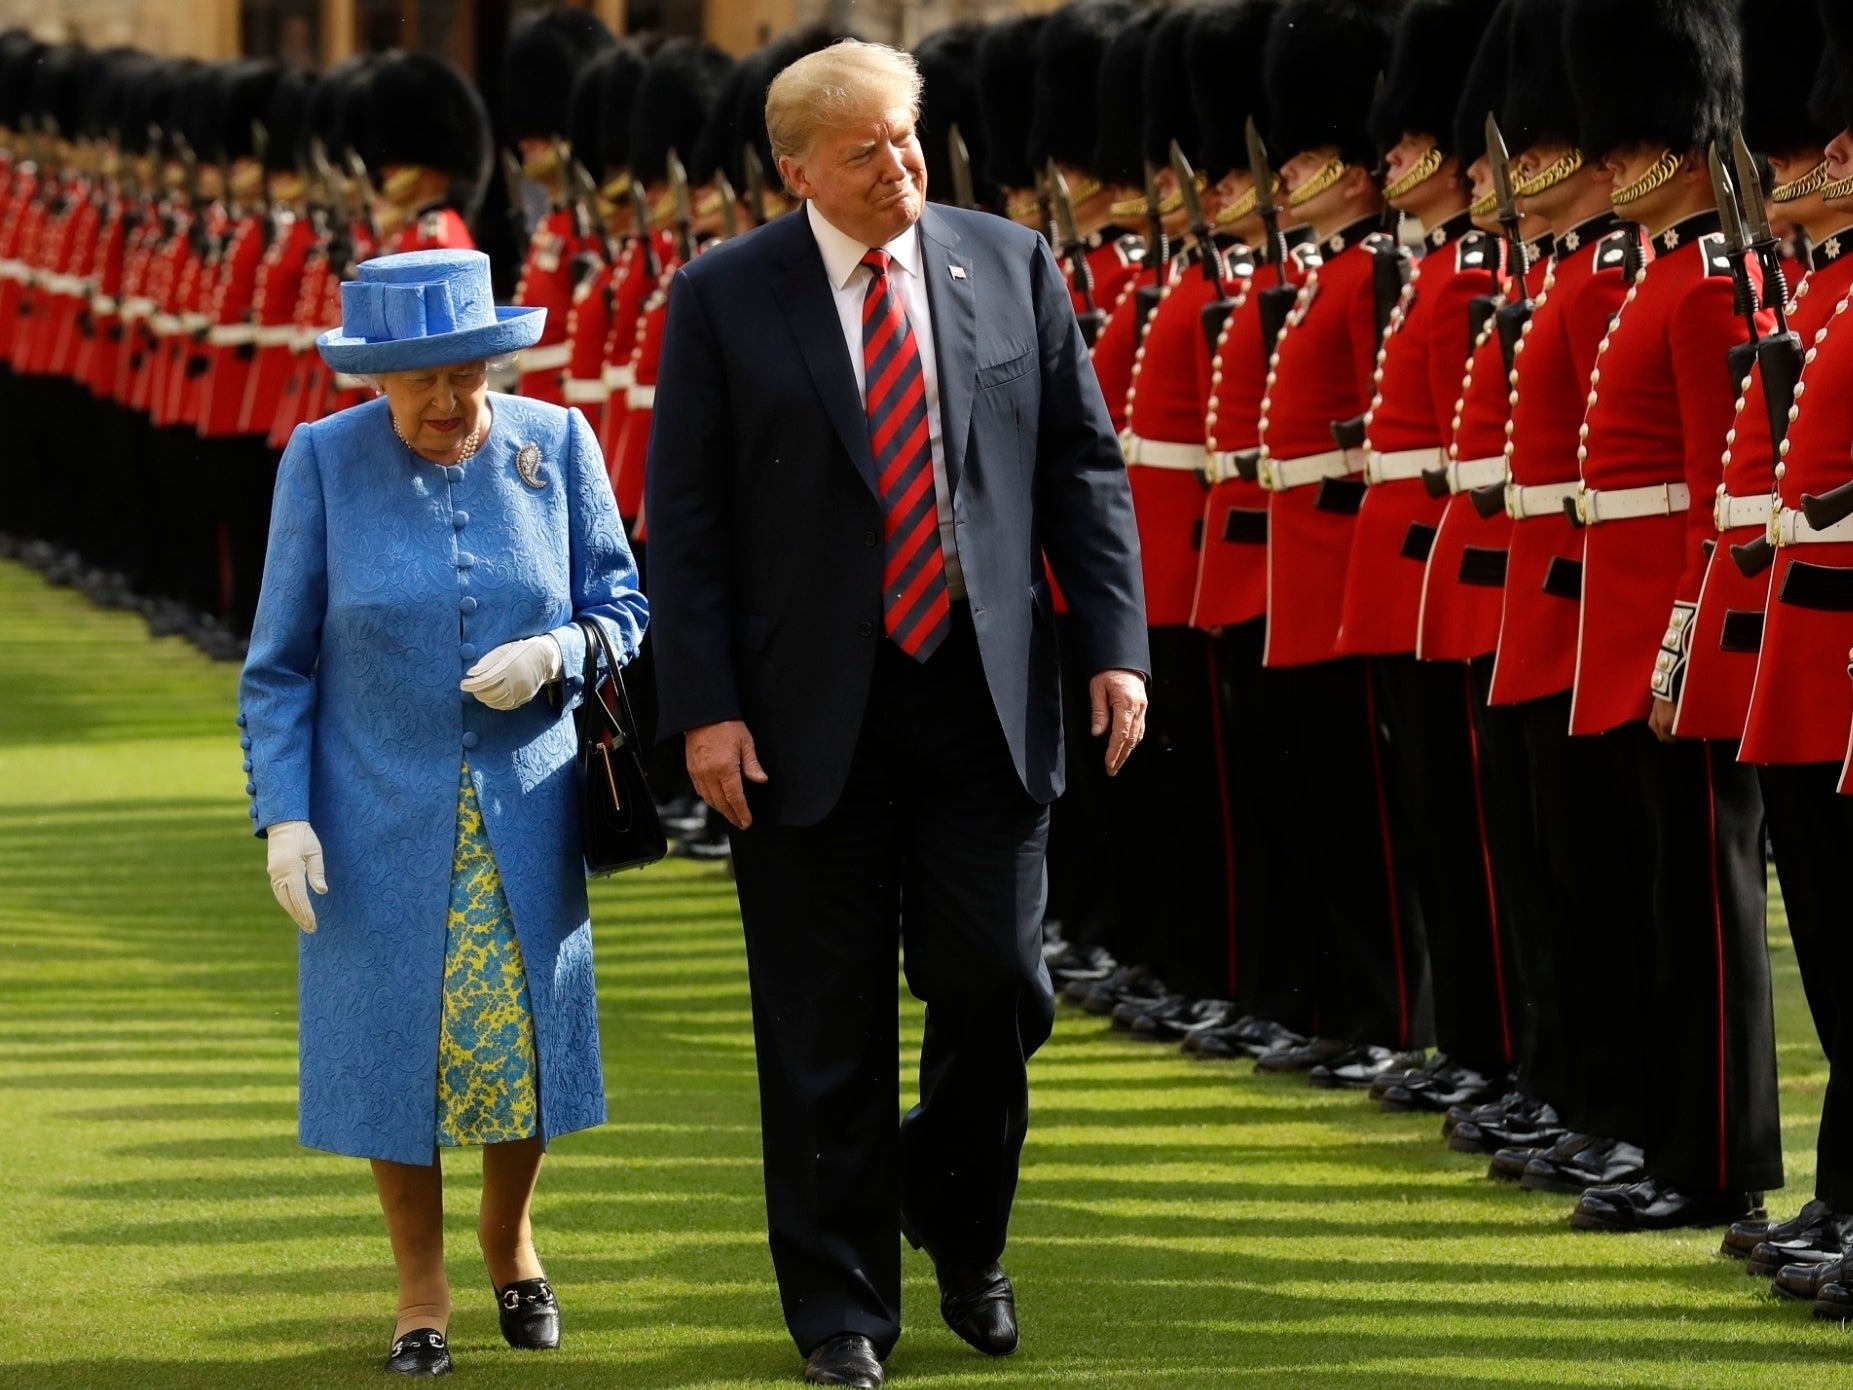 The Queen met the US president alone last July